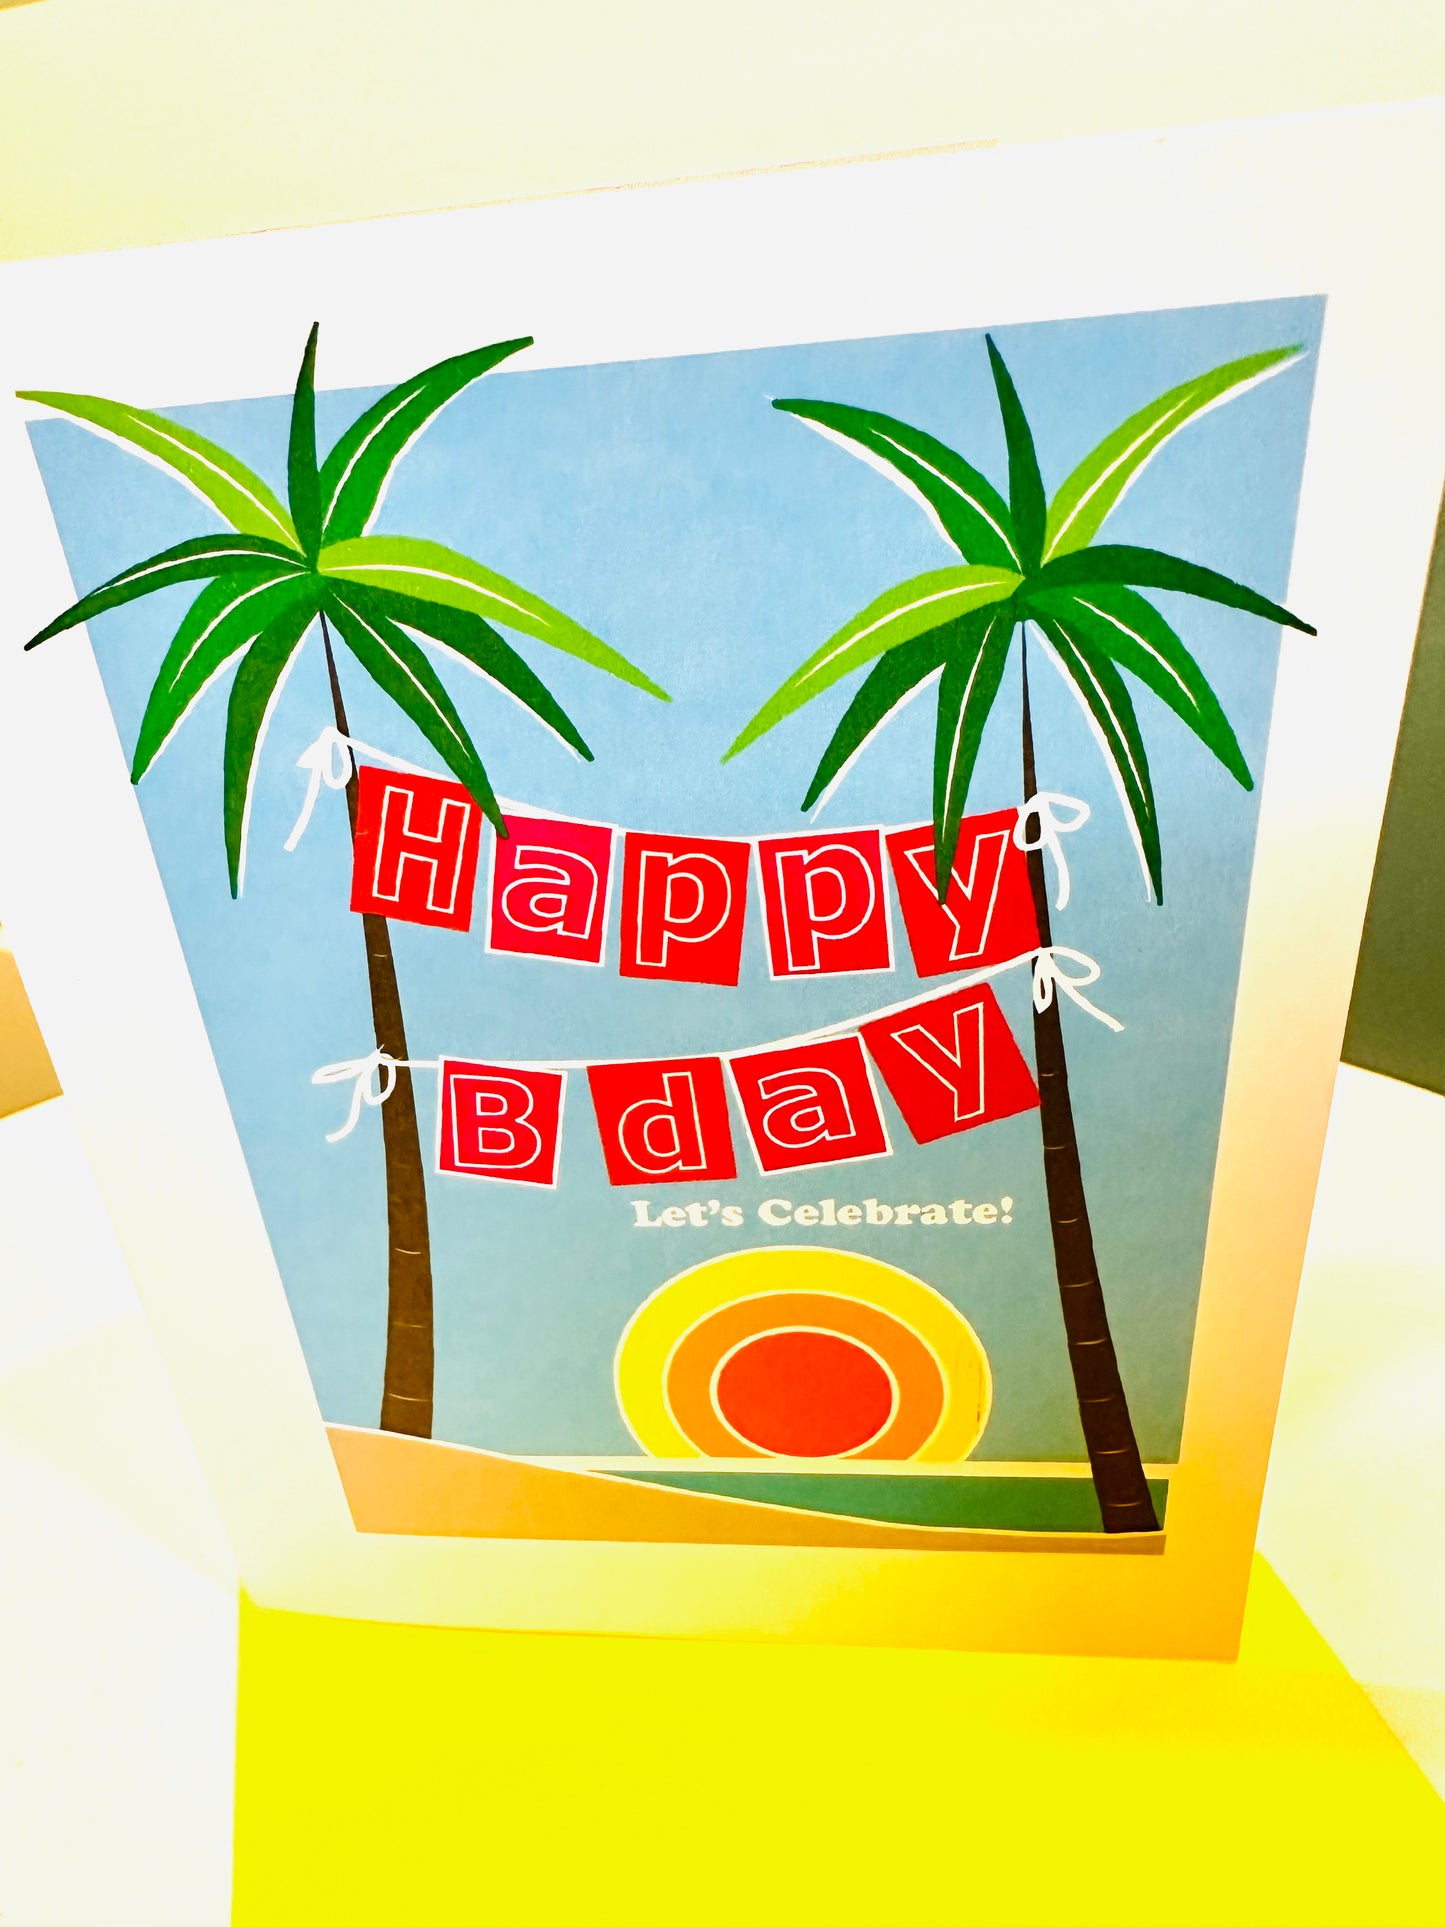 Blue ISLAND HAPPY BDAY Cards A2 5.5L X 4.25W boxed note card set of 10